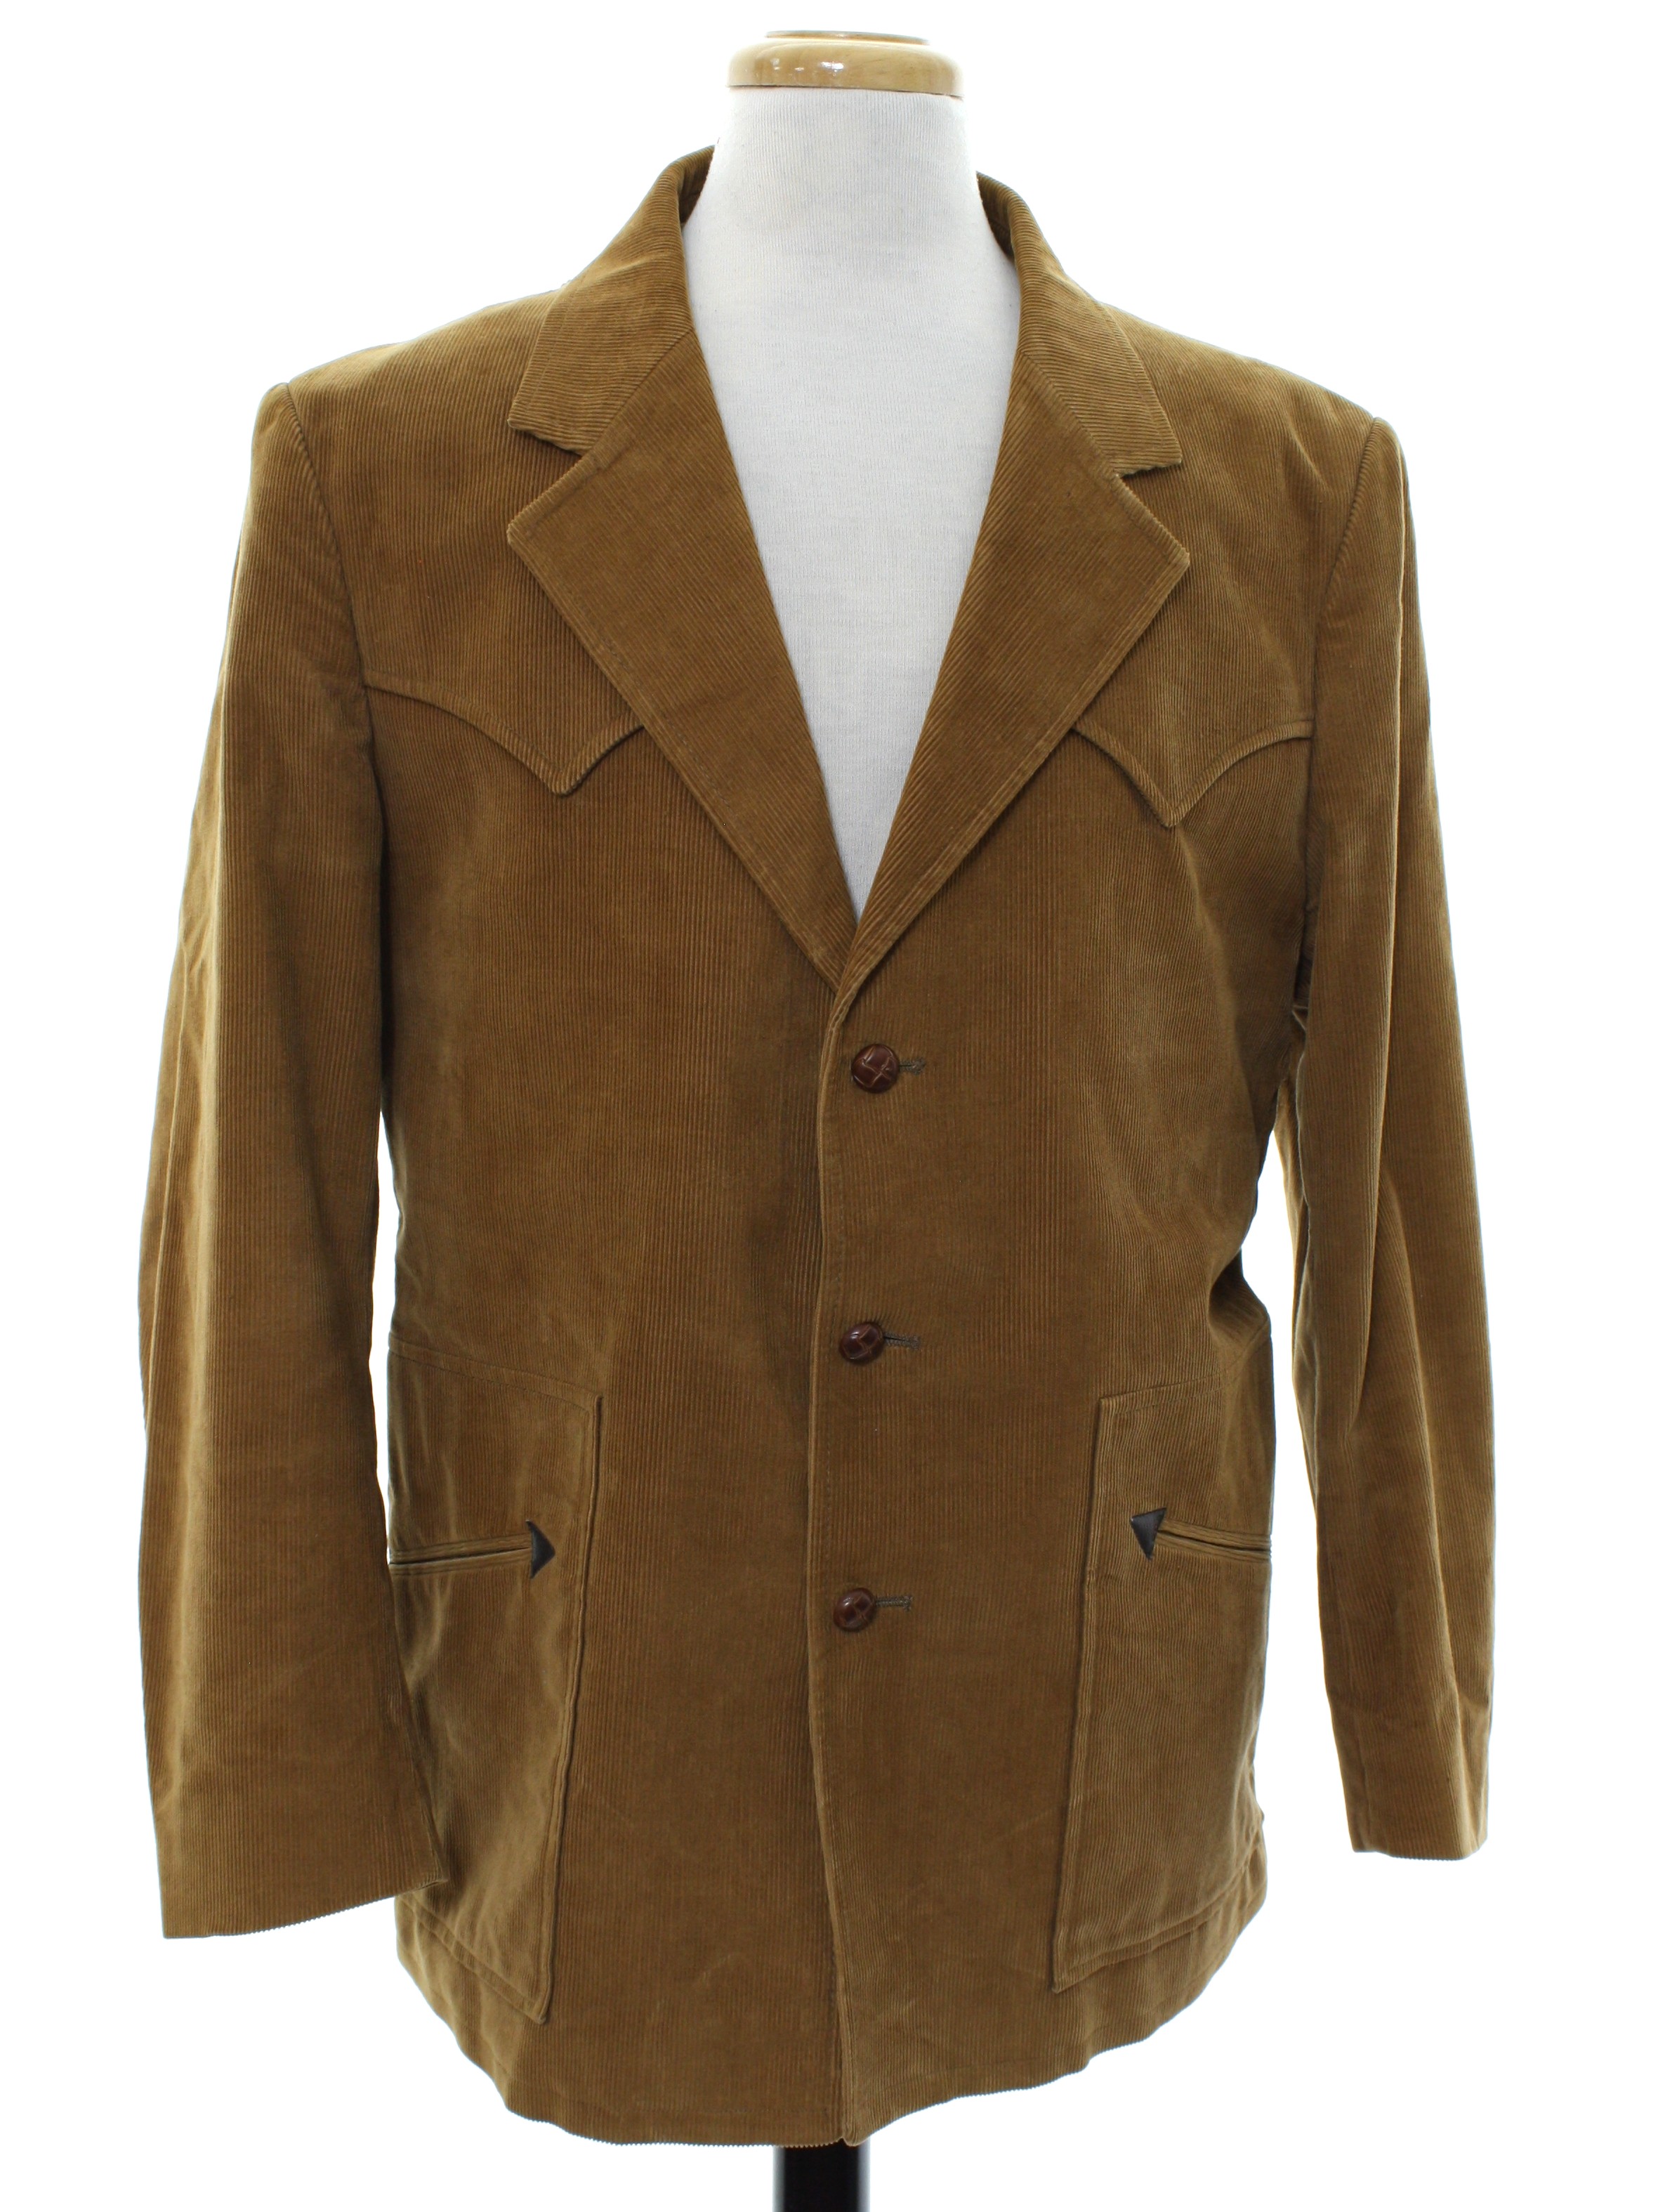 Vintage 70s Jacket: Late 70s or Early 80s -Brad Whitney California ...